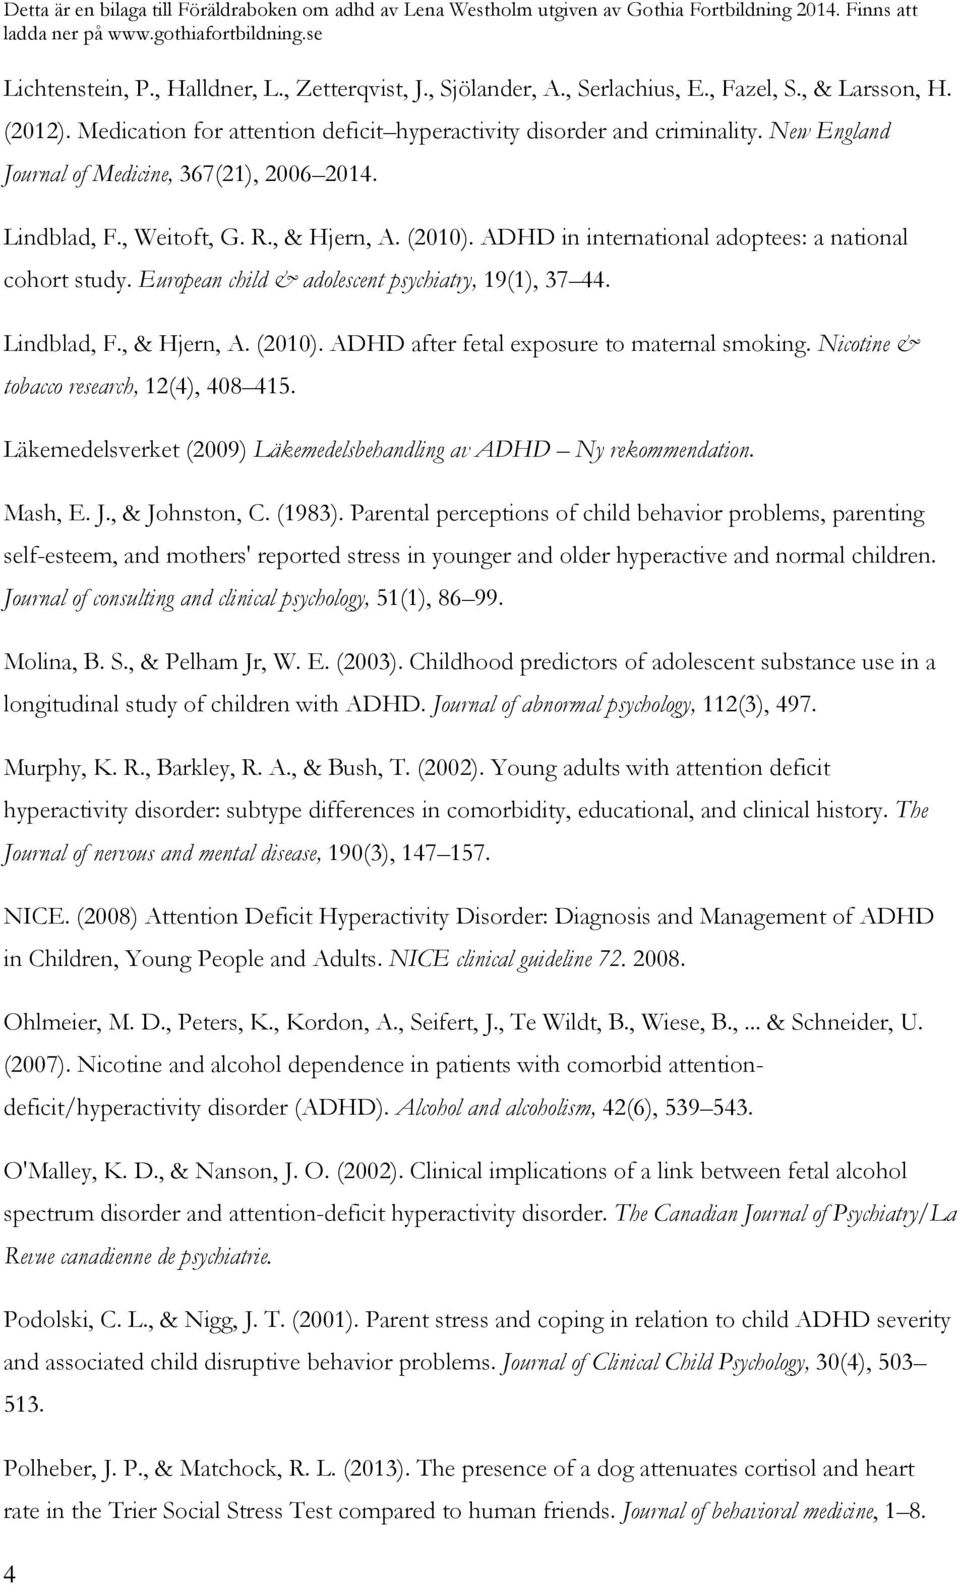 European child & adolescent psychiatry, 19(1), 37 44. Lindblad, F., & Hjern, A. (2010). ADHD after fetal exposure to maternal smoking. Nicotine & tobacco research, 12(4), 408 415.